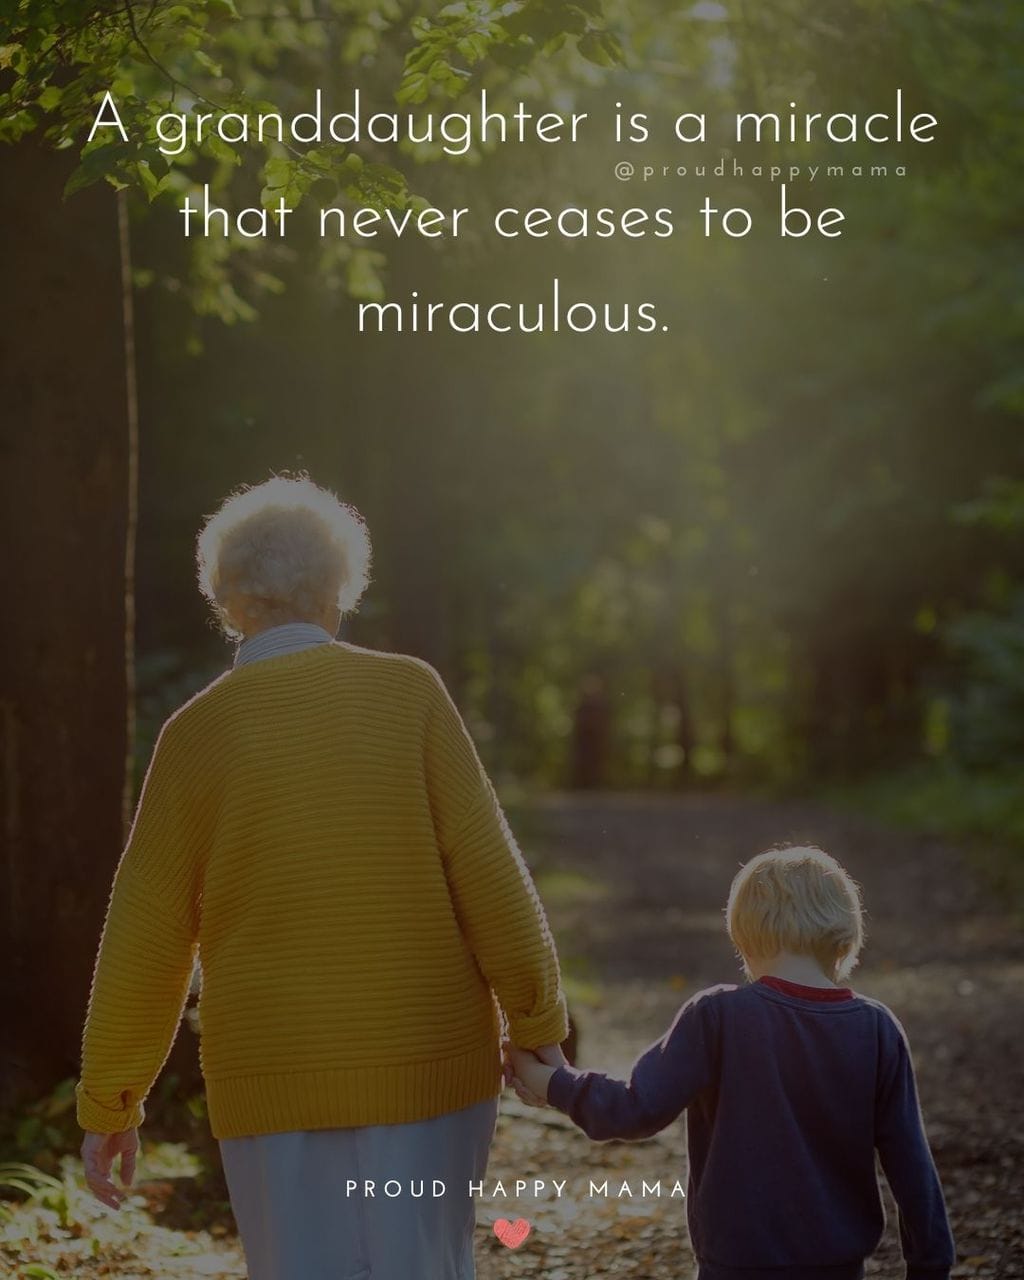 Granddaughter and grandmother walking in woods with back to camera, with text overlay, ‘A granddaughter is a miracle that never ceases to be miraculous.’